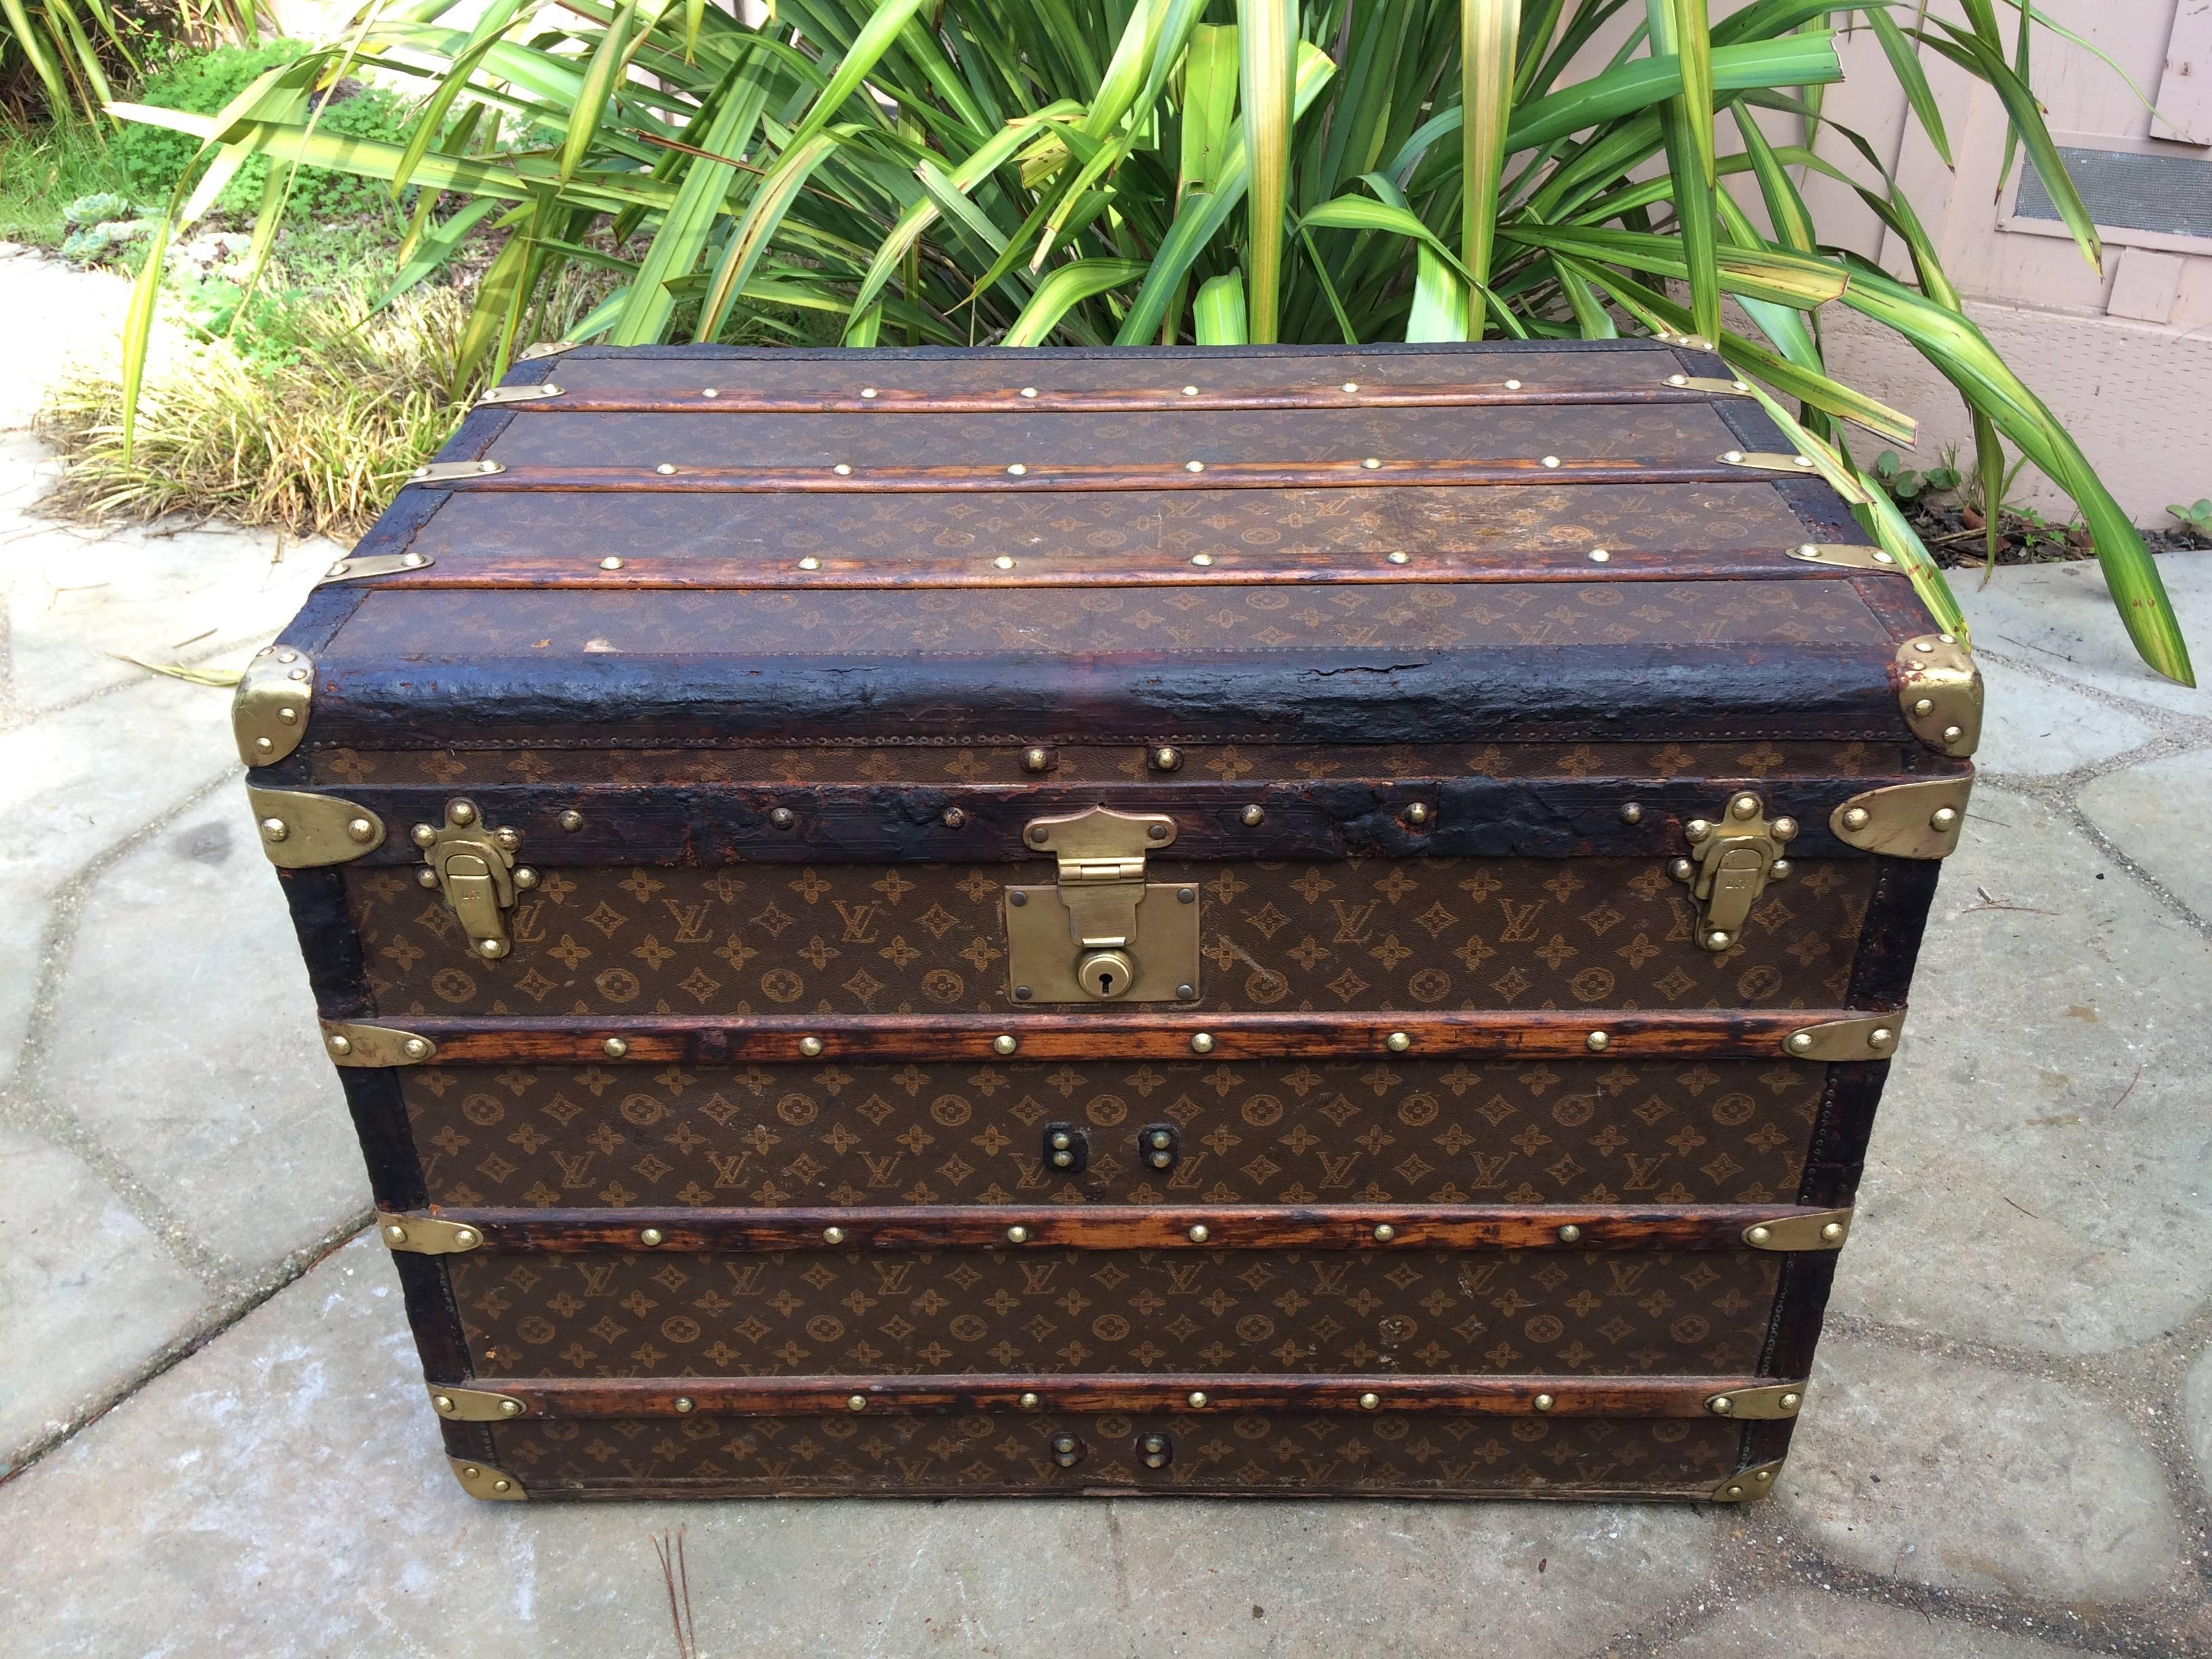 Antique Louis Vuitton Steamer Wardrobe Trunk In Excellent Condition For Sale In Carmel-by-the-sea, CA